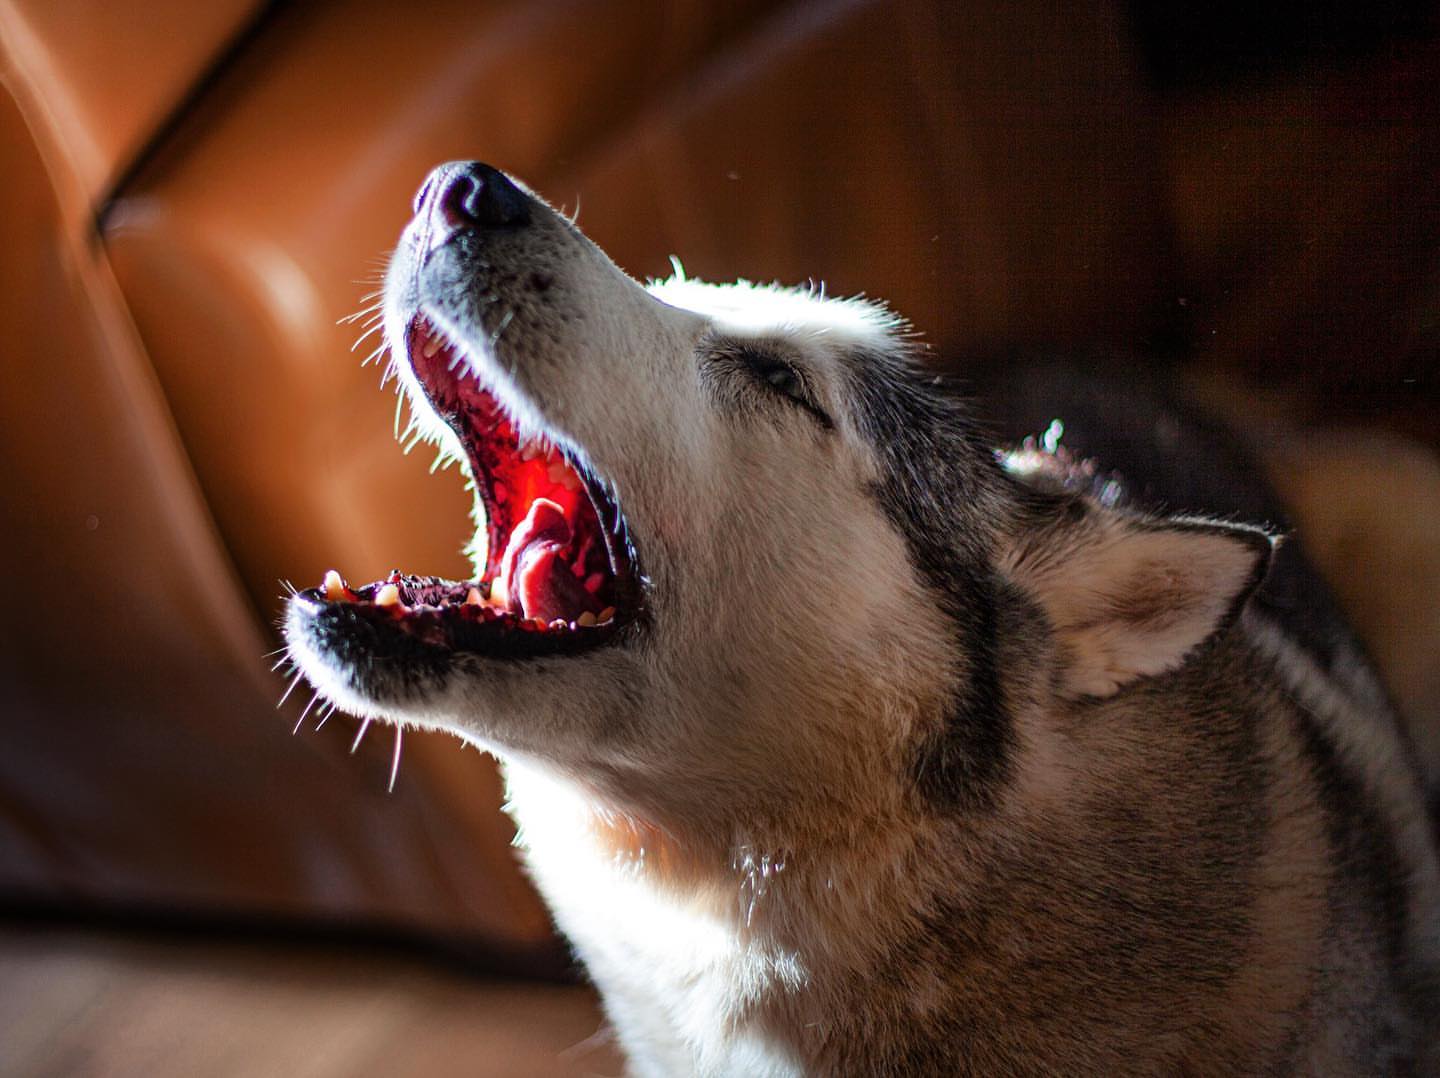 are huskies just mouthy